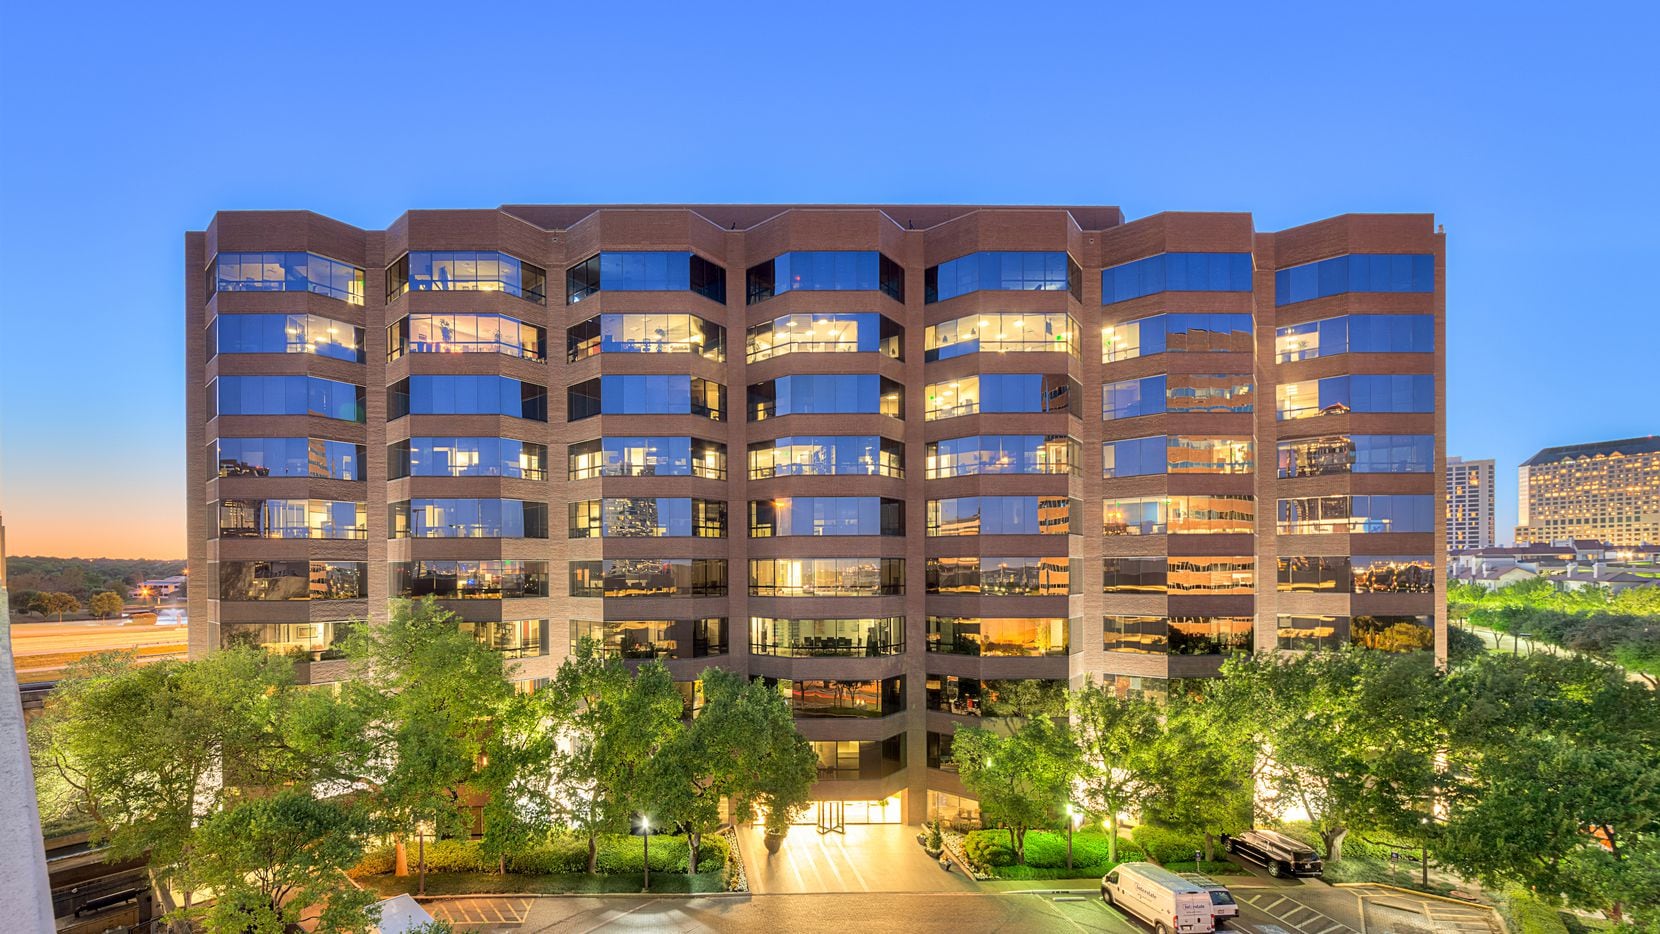 The hotel company is moving to the Canal Centre office building on Las Colinas Boulevard in...